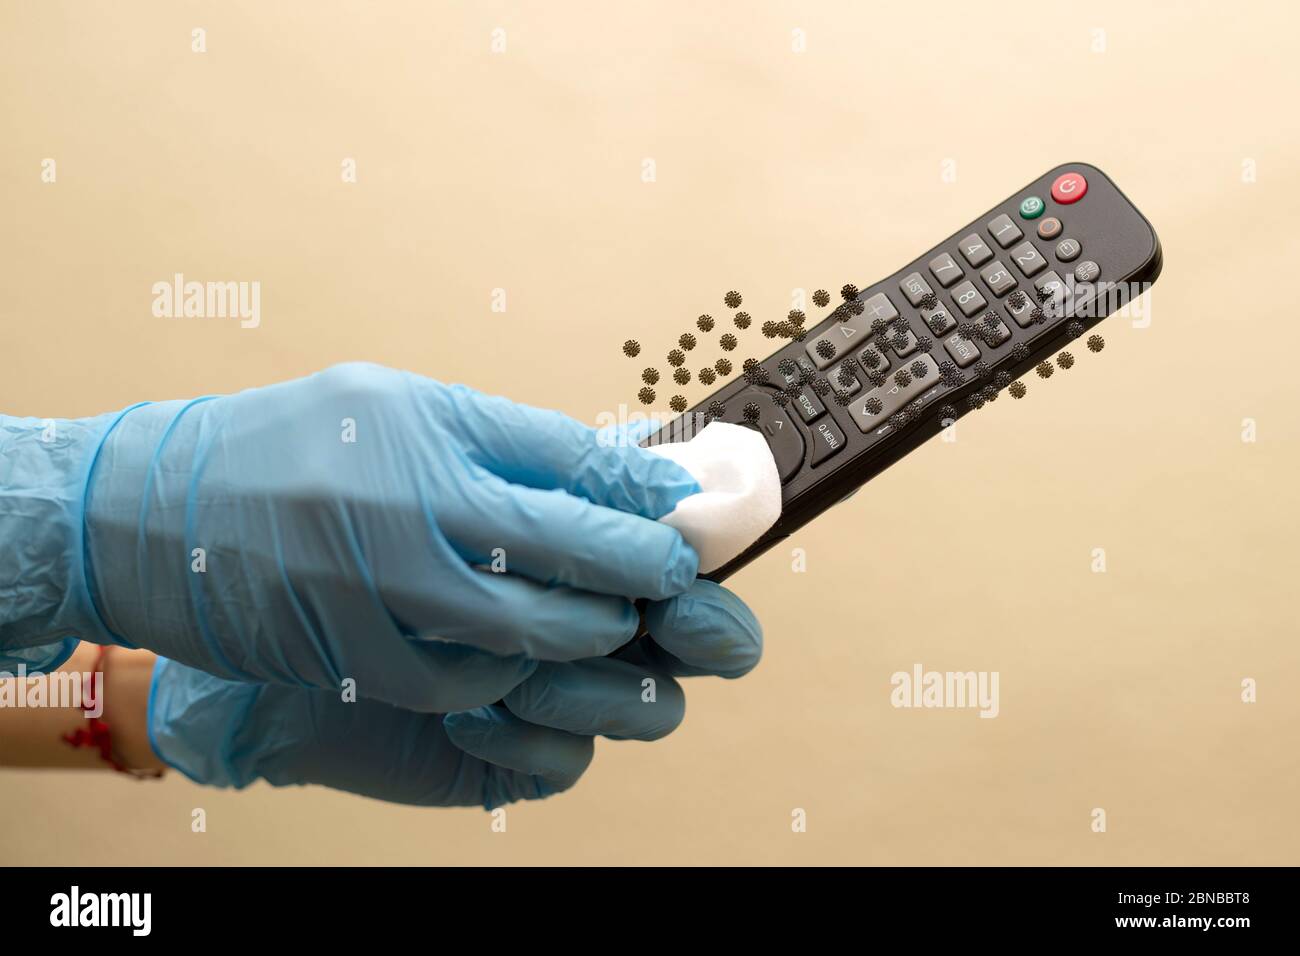 Woman wiping television remote control in house wearing blue gloves and using disinfectant wipe. Stock Photo